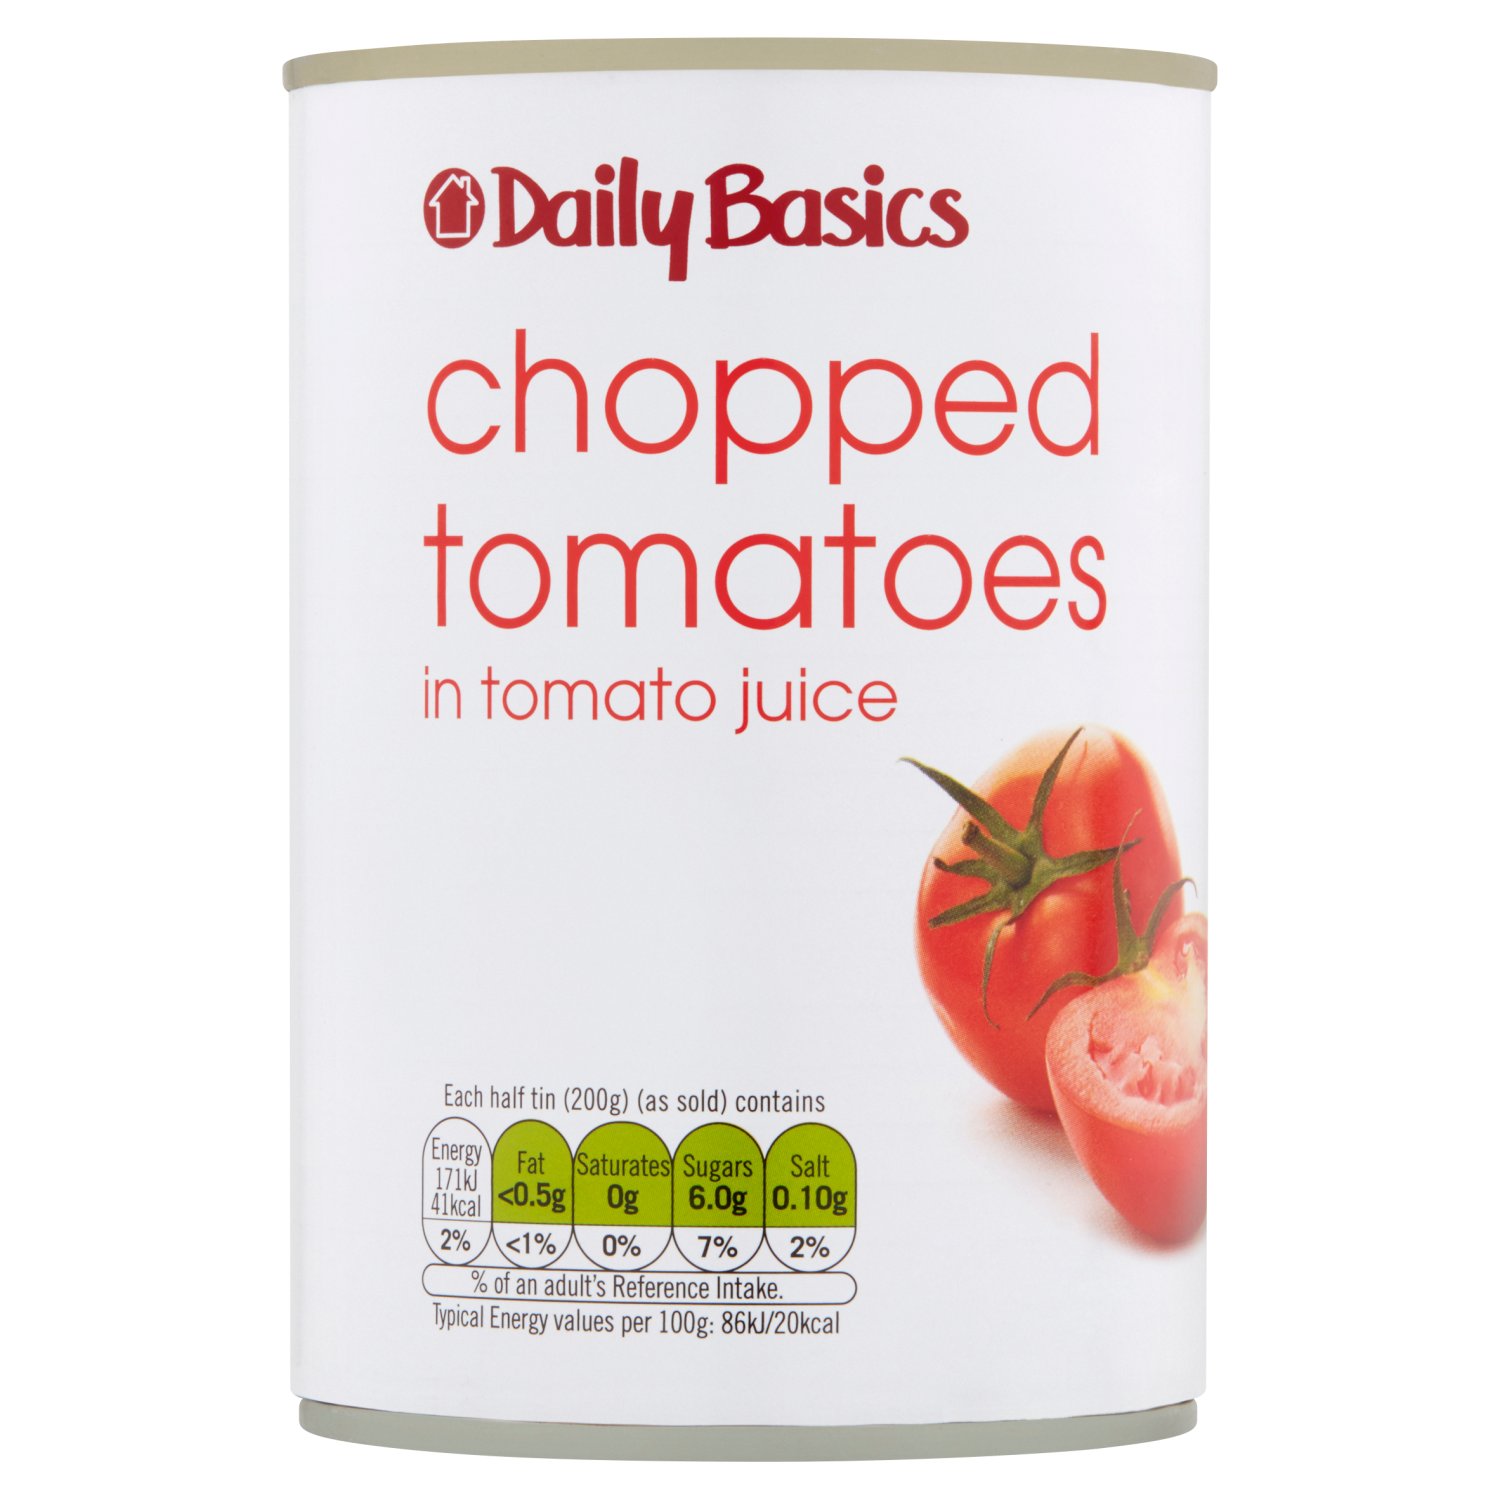 1 of 5 a day* It is recommended that we eat at least 5 portions of fruit and vegetables every day to maintain a healthy lifestyle. * 80g of DB Chopped Tomatoes equals one of your five a day.